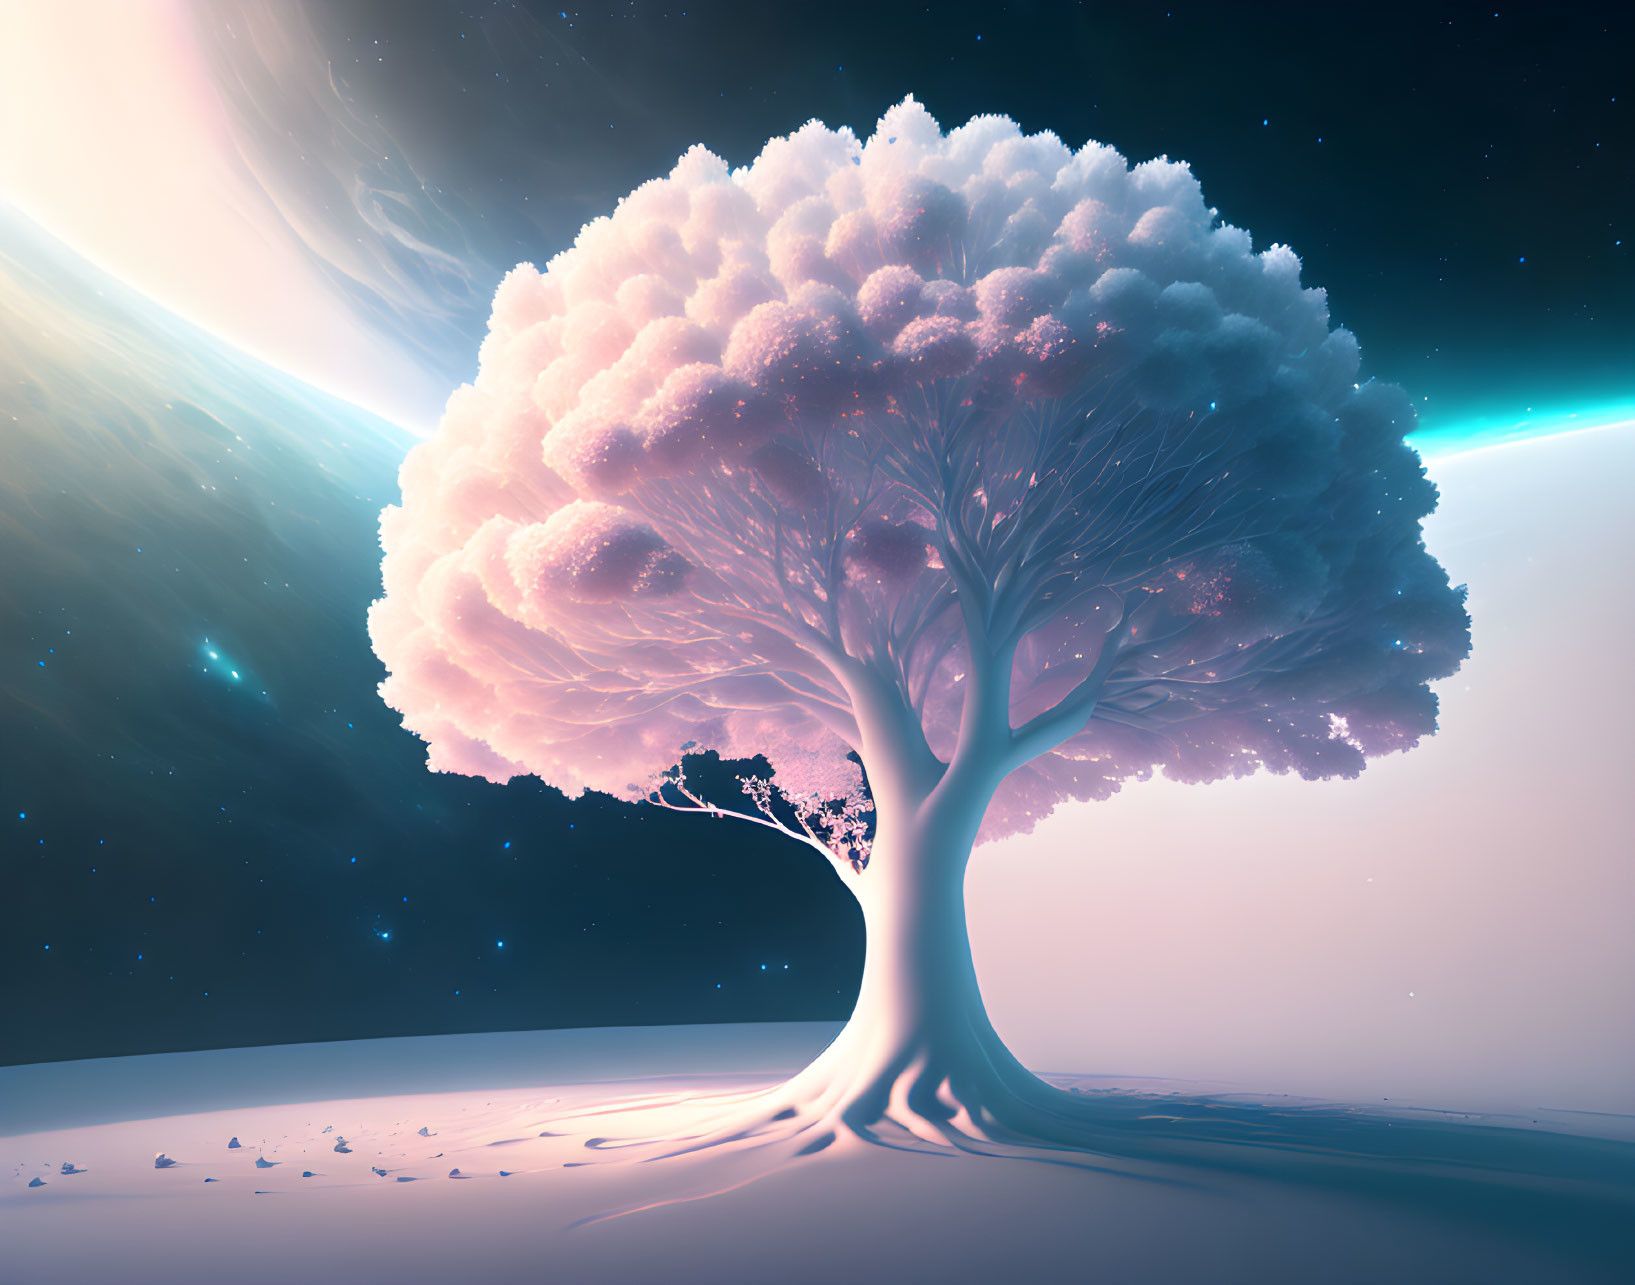 Colorful digital artwork: Solitary tree under cosmic sky with roots and floating particles